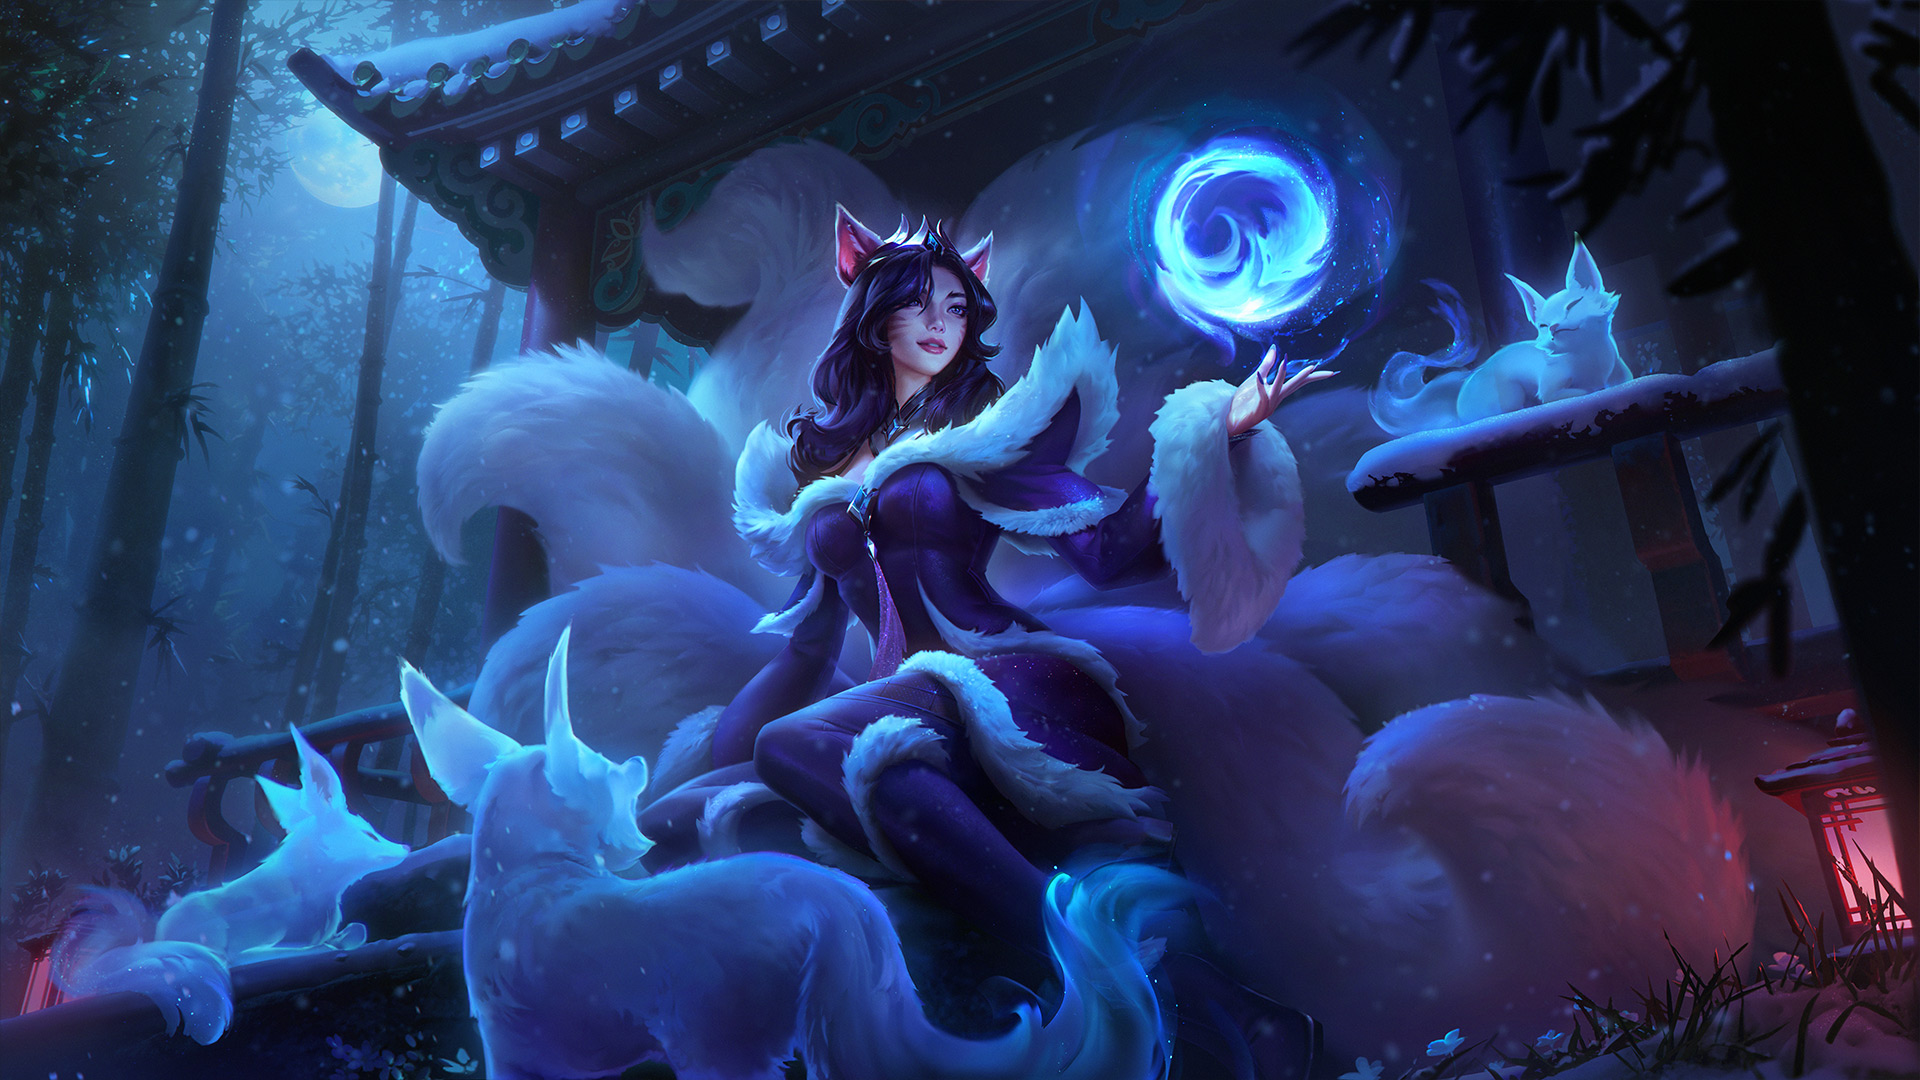 Join the discussion about Ahri on the League of Legends subreddit, where players share tips, fan art, and more.
10. Ahri - League of Legends - DeviantArt - wide 5